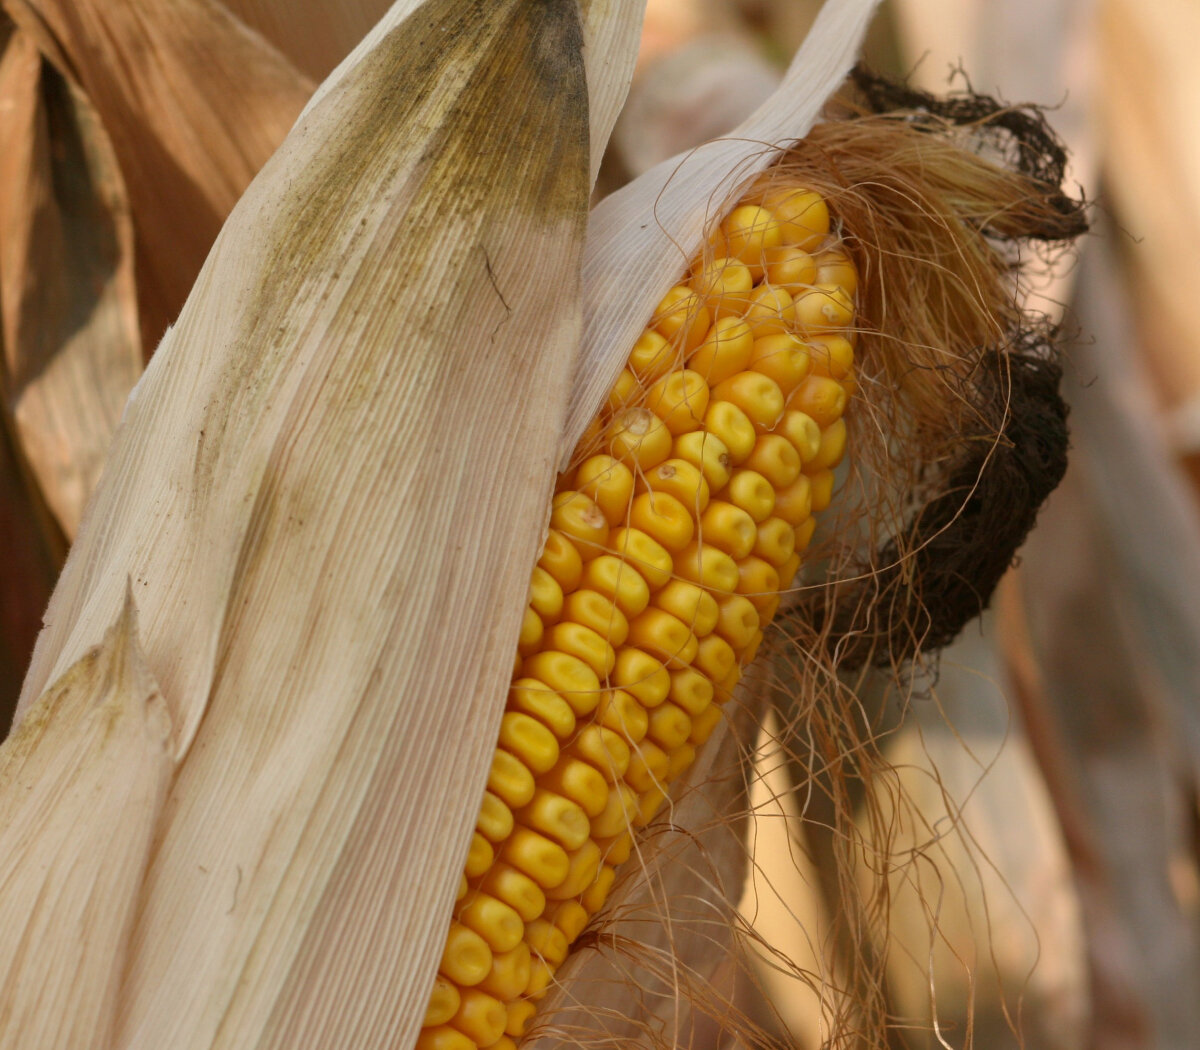 National Corn Yield Contest Winners Announced